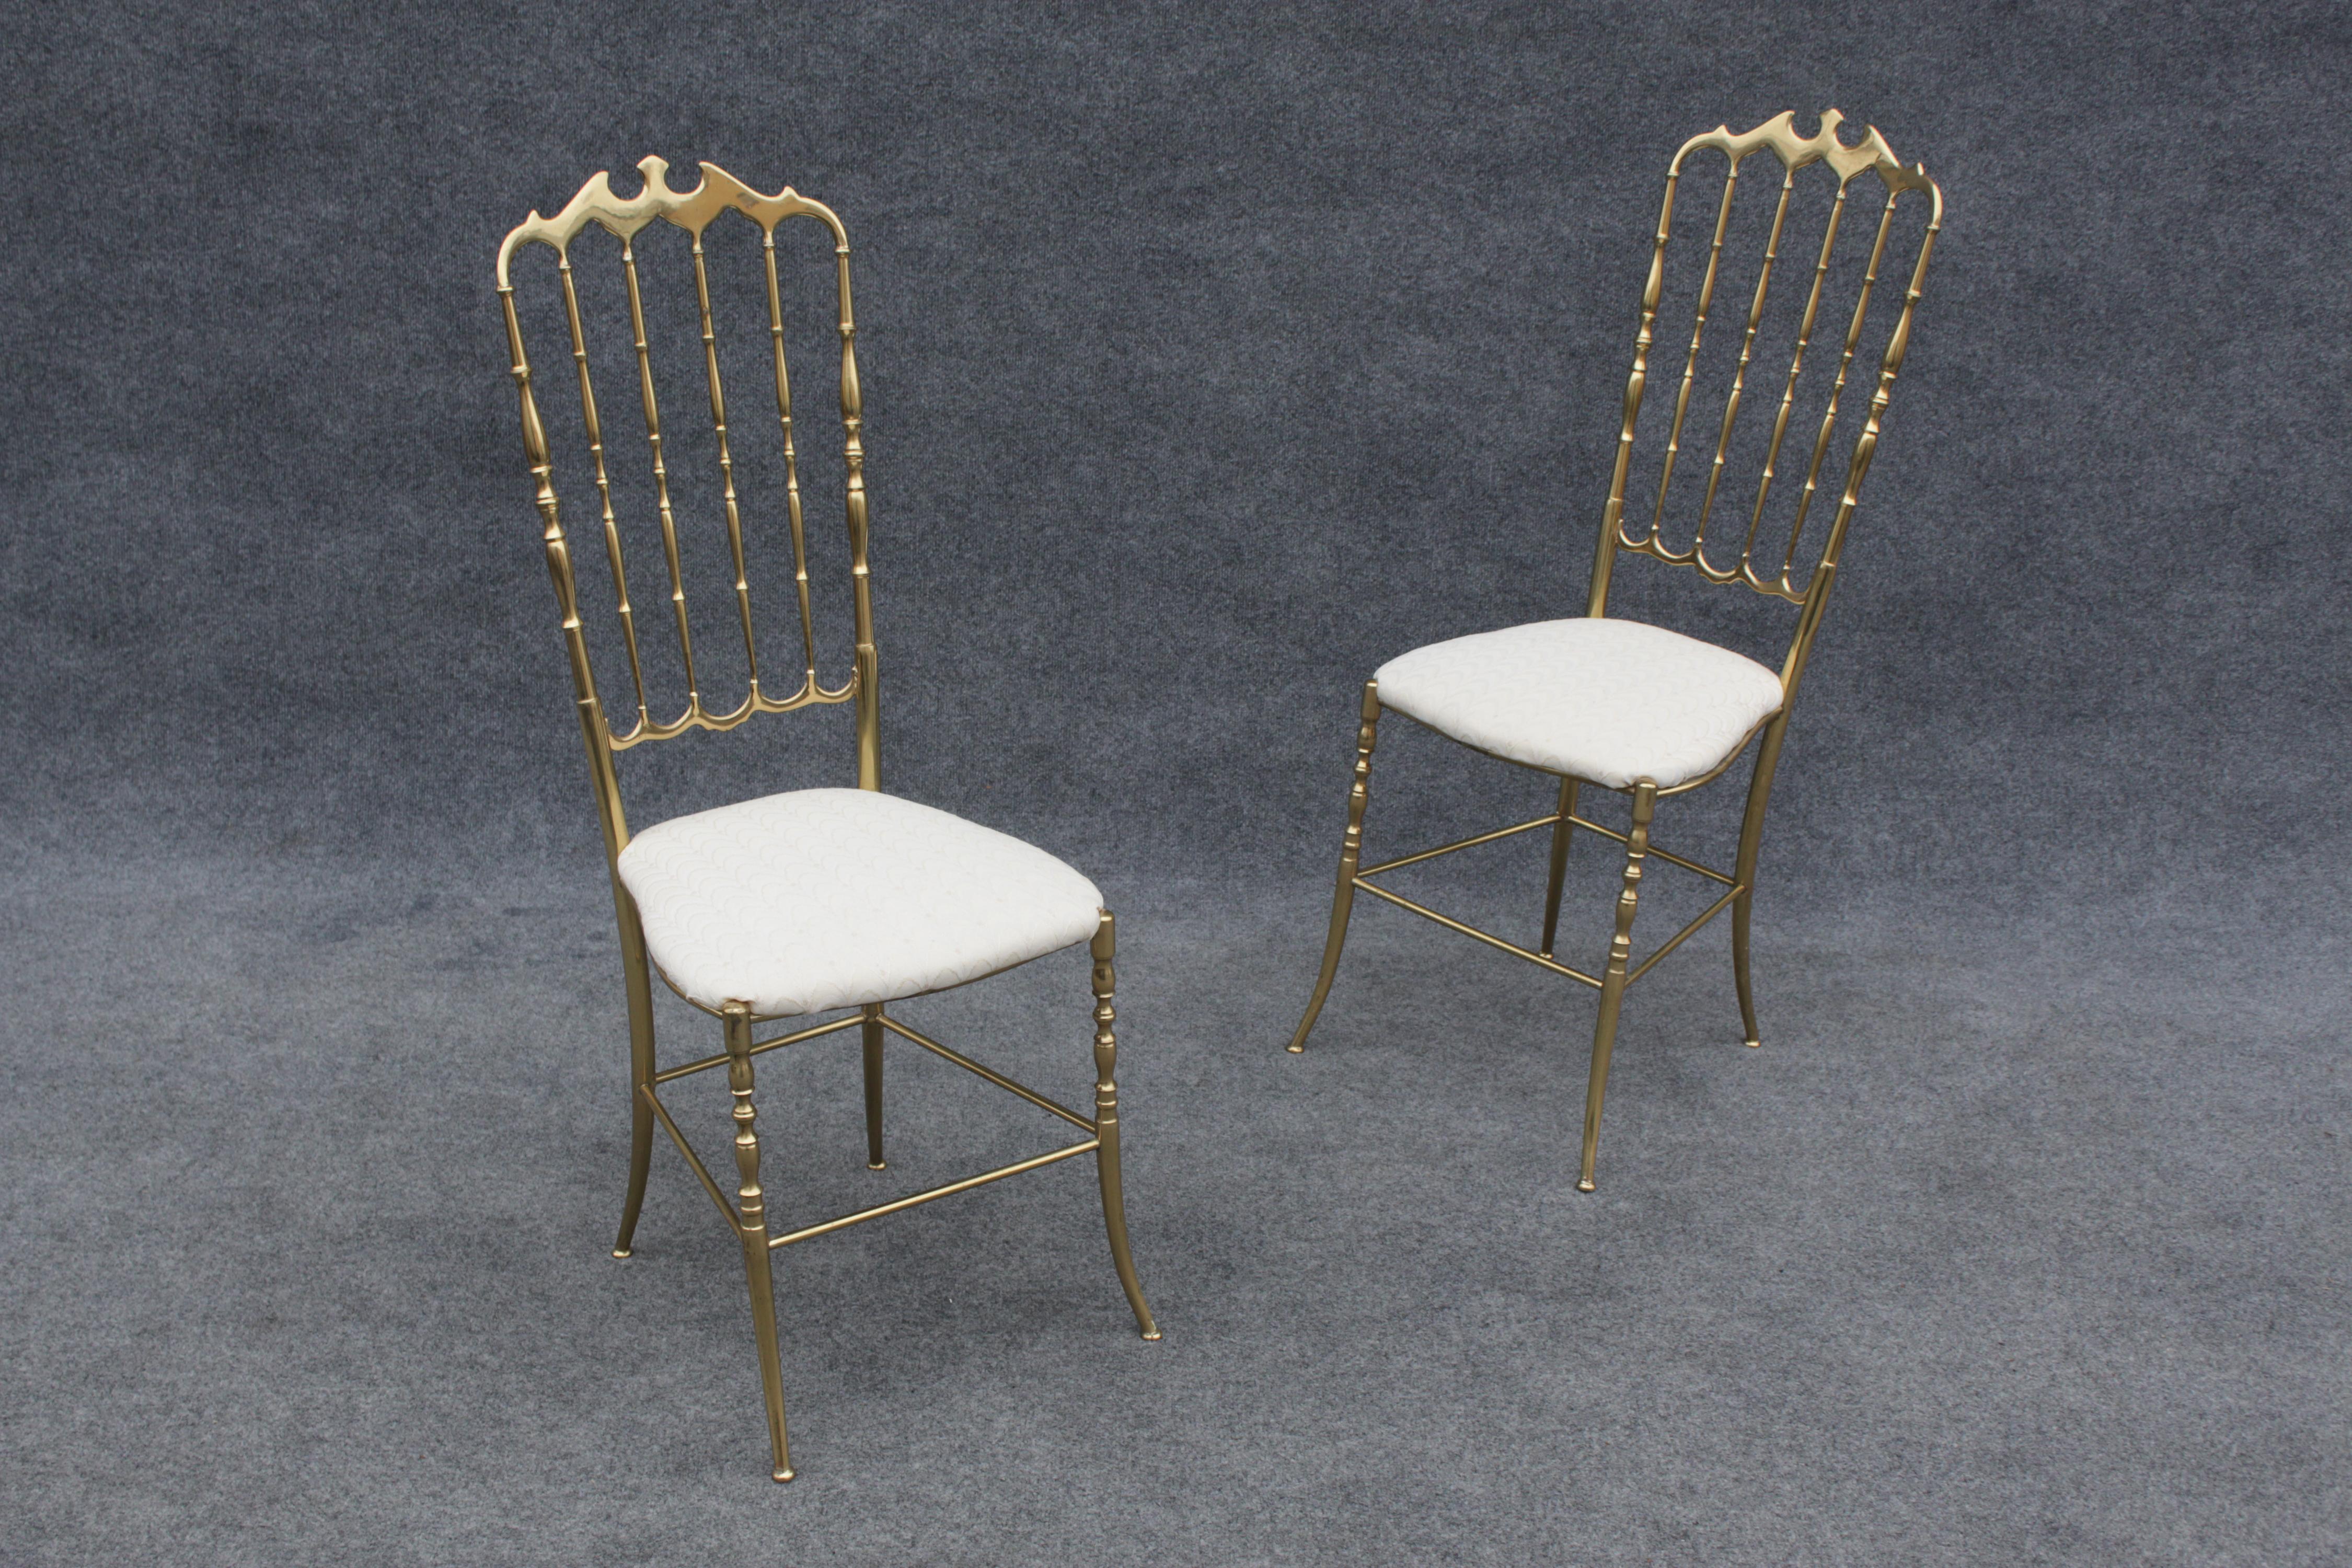 Pair of Solid Brass & White Upholstered Dining or Side Chairs by Chiavari Italy For Sale 5